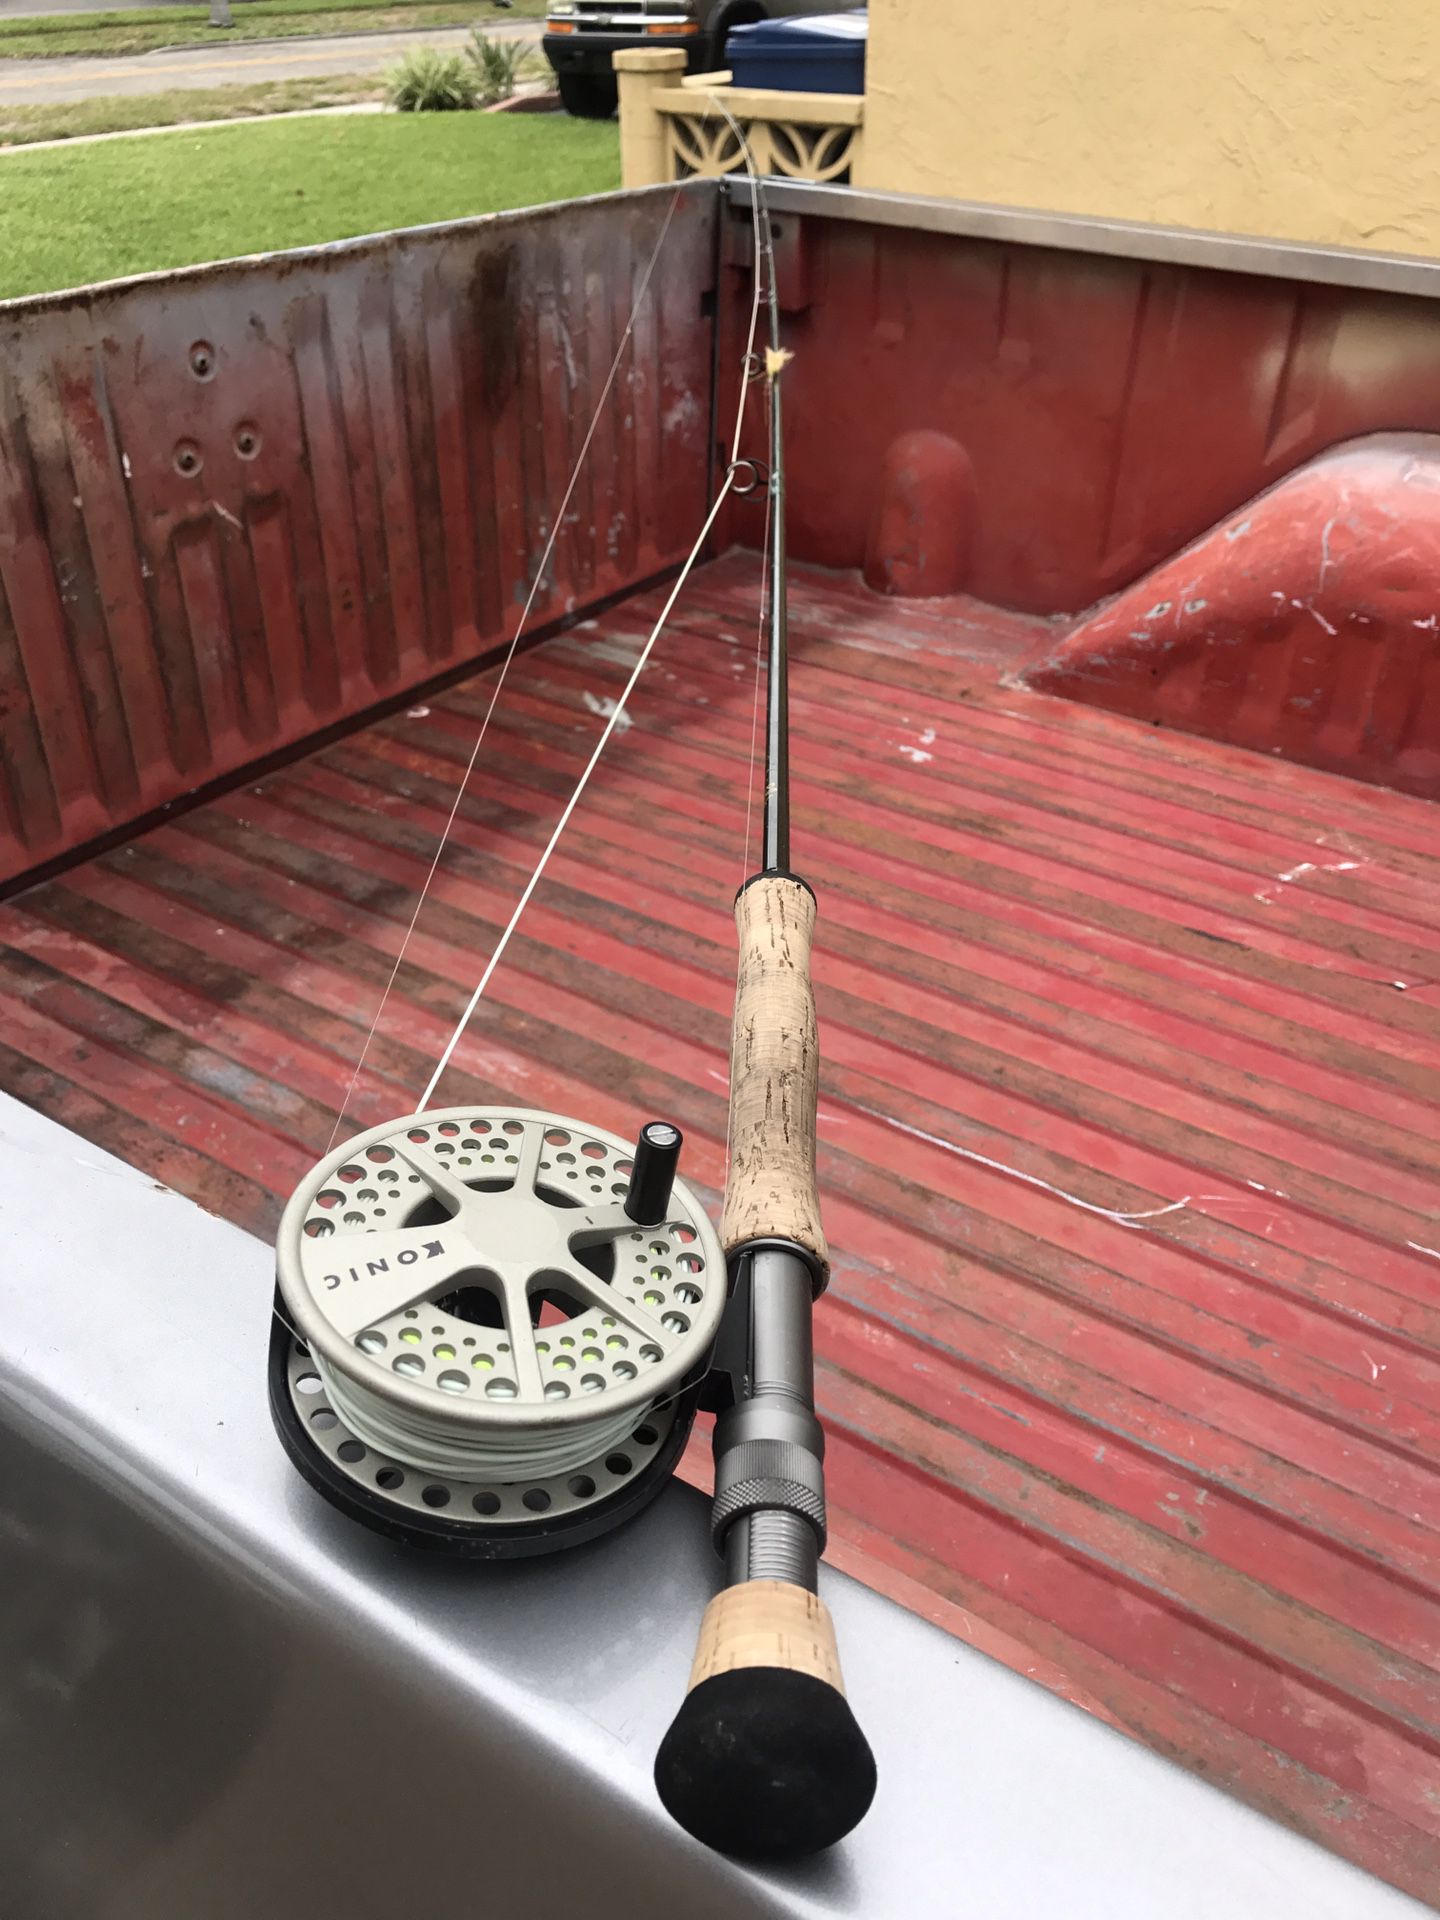 Lamson konic 8wt fly reel and TFO 8wt fly fishing rod for Sale in